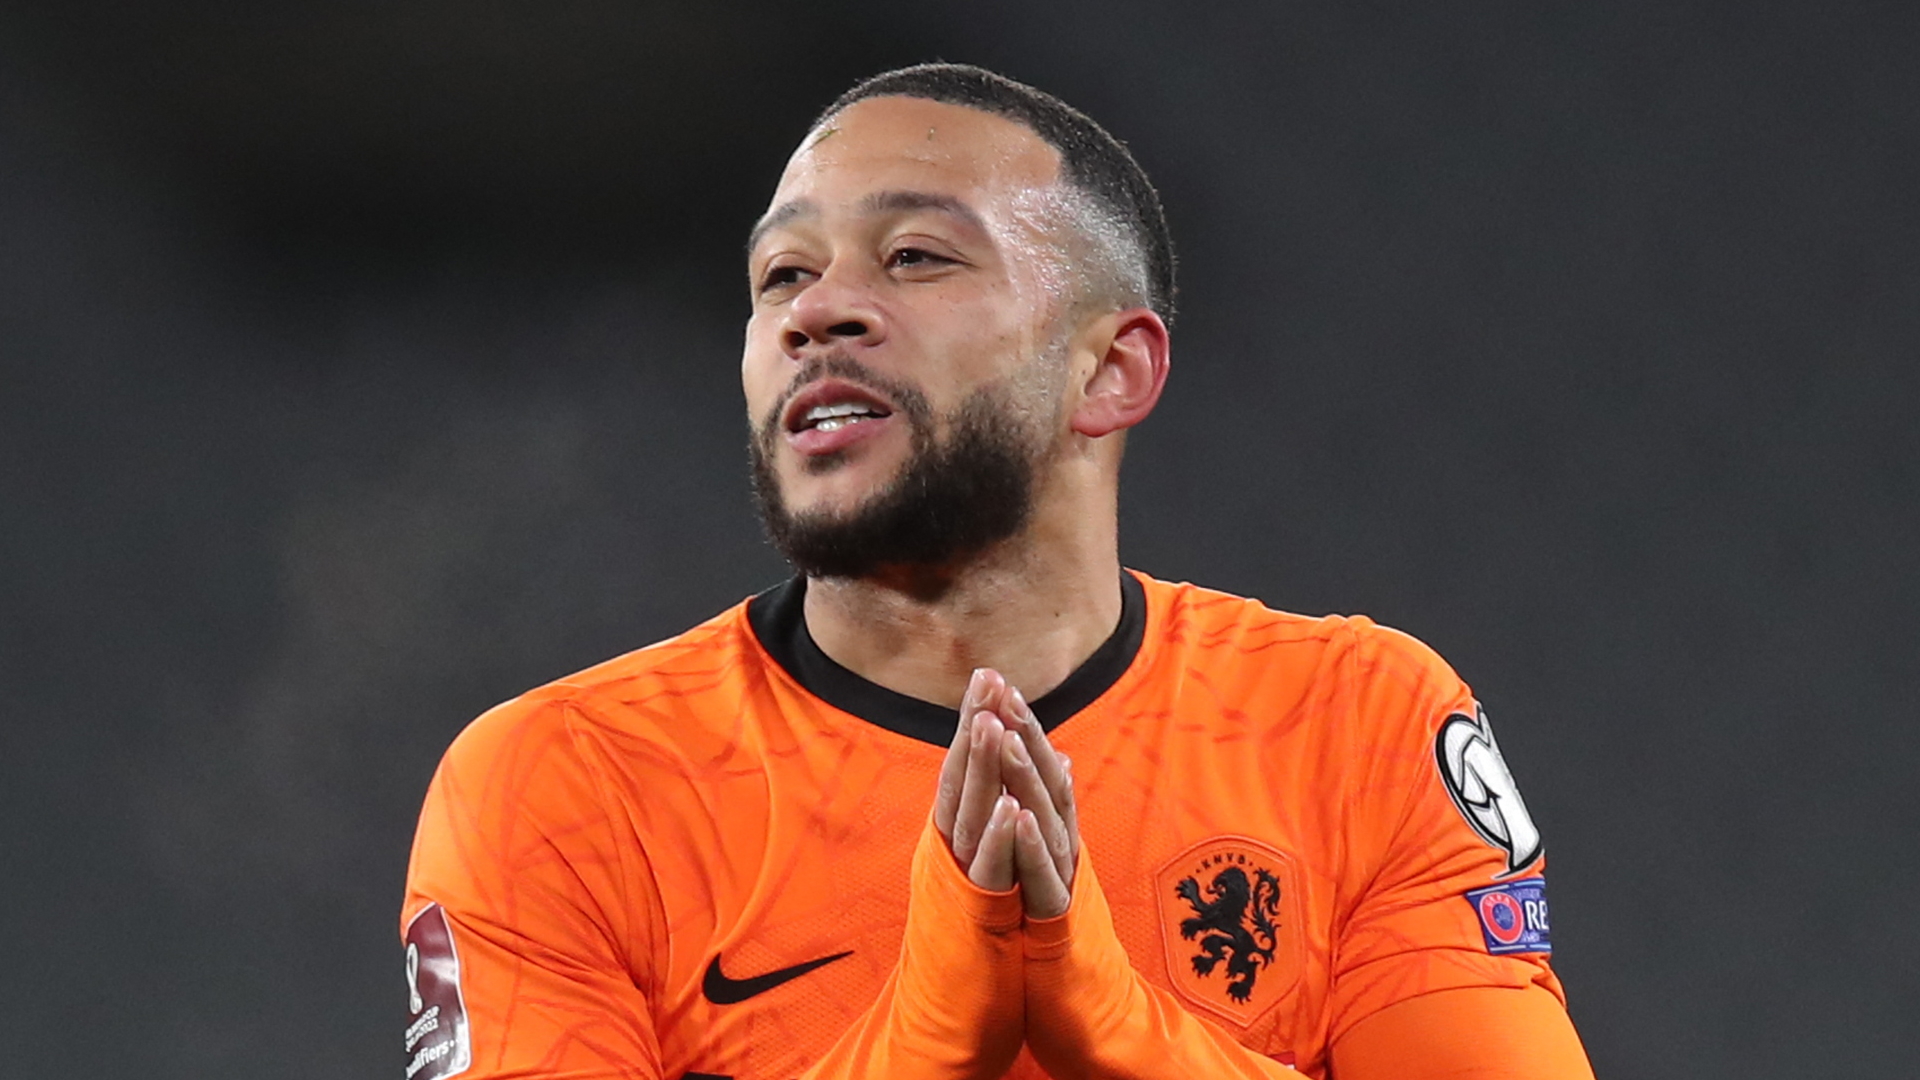 Transfer news and rumours LIVE: Barcelona prioritise Depay signing